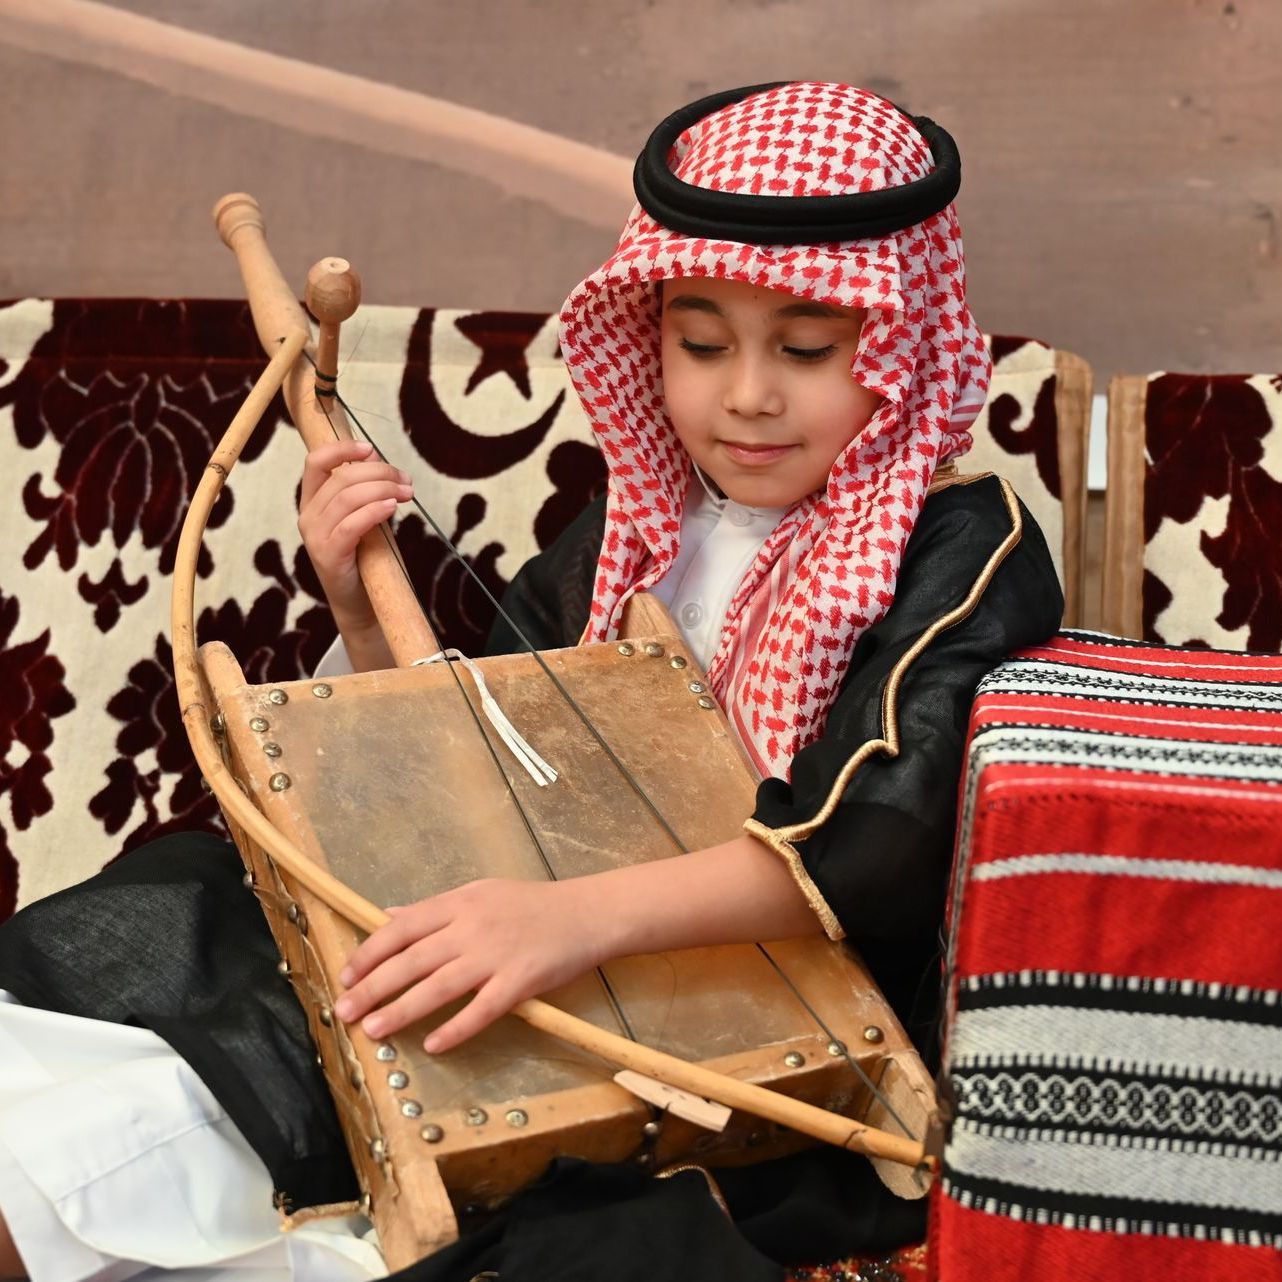 A young boy in a traditional costume is playing a musical instrument